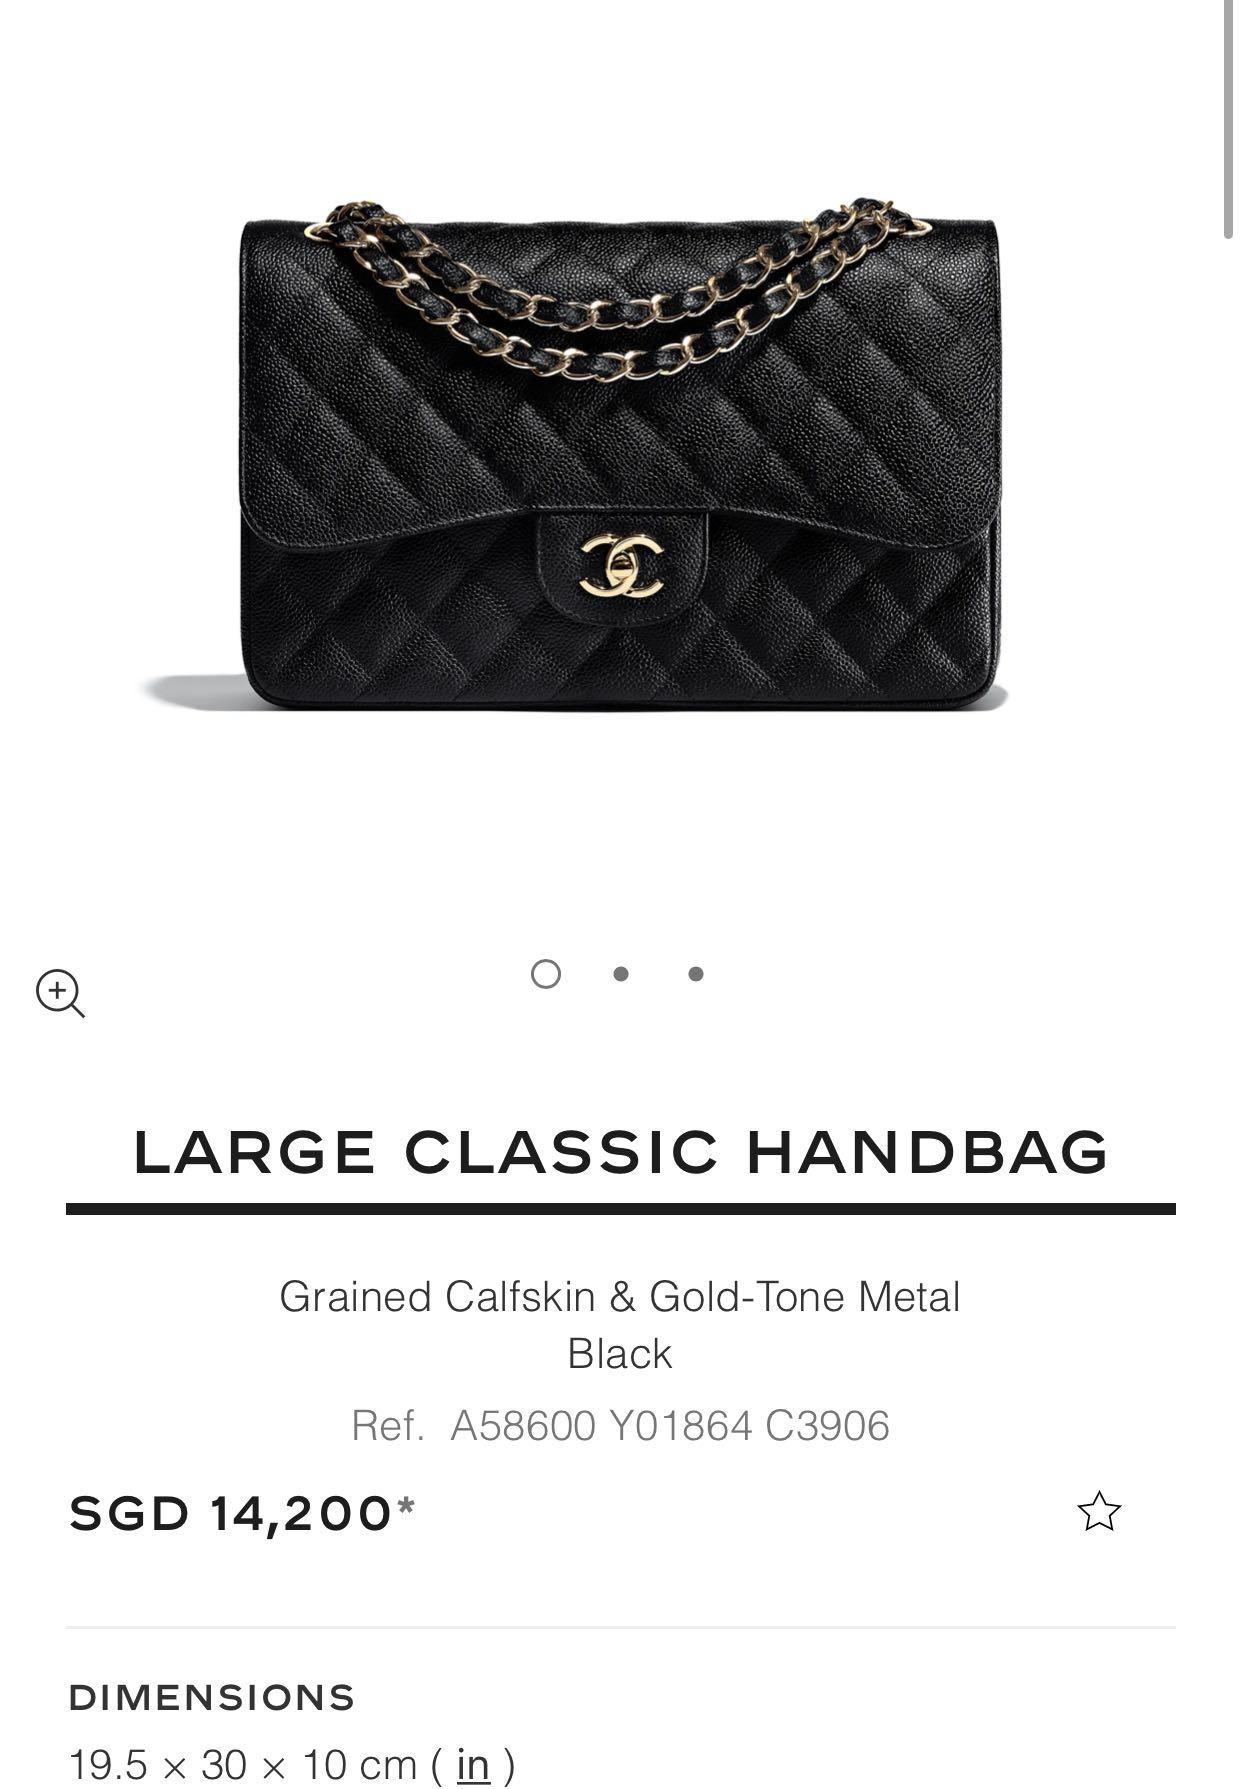 Purse Insert For Chanel Classic Jumbo Flap Bag (Style A58600